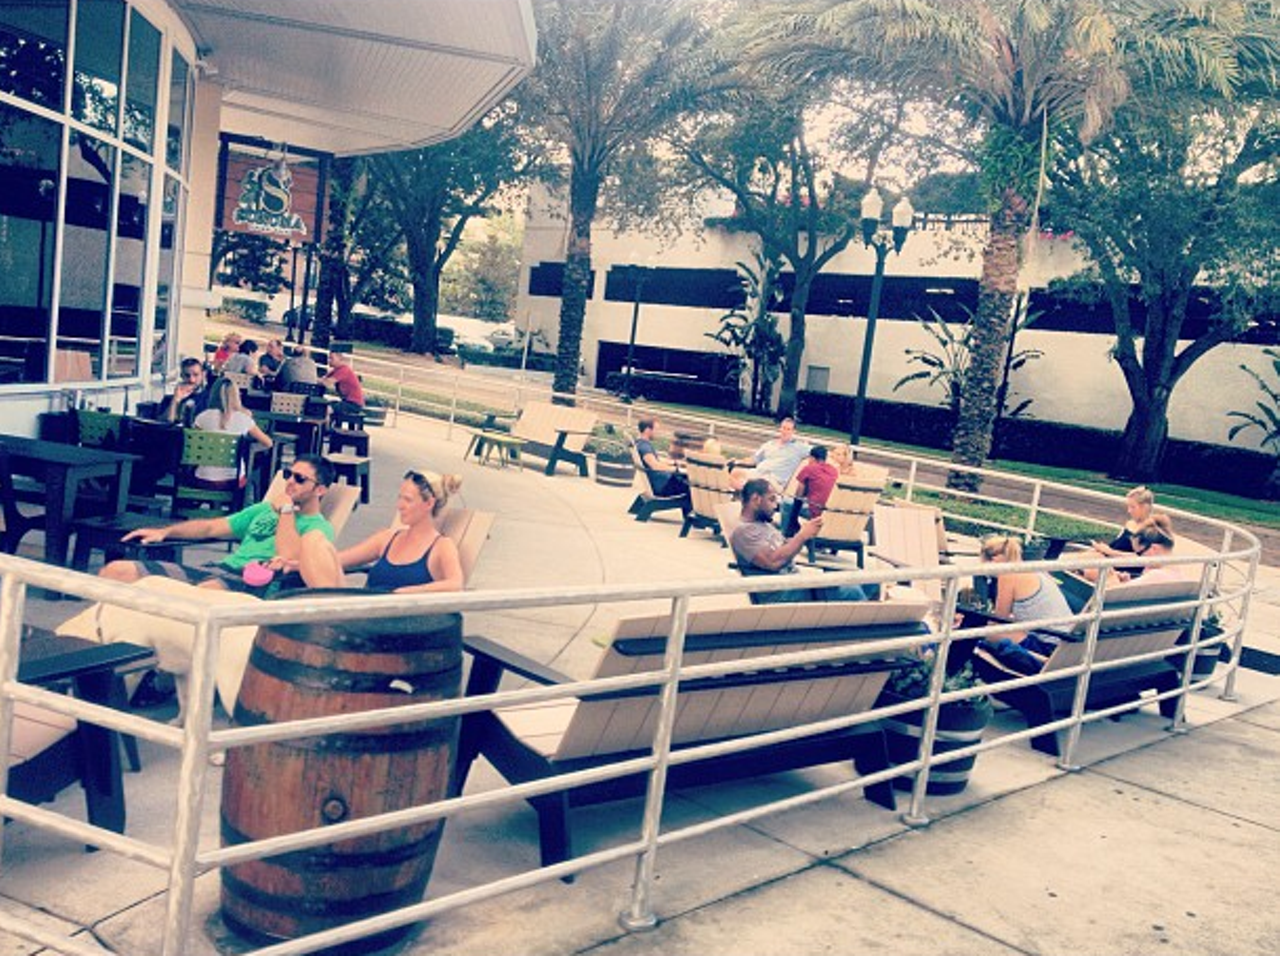 Sonoma Kitchen
100 S Eola Dr, Orlando
407-730-3400
Sonoma Kitchen sports probably one of the roomiest patios in the Thornton Park area, plus a great beer list.Photo via c2norlando on Instagram.